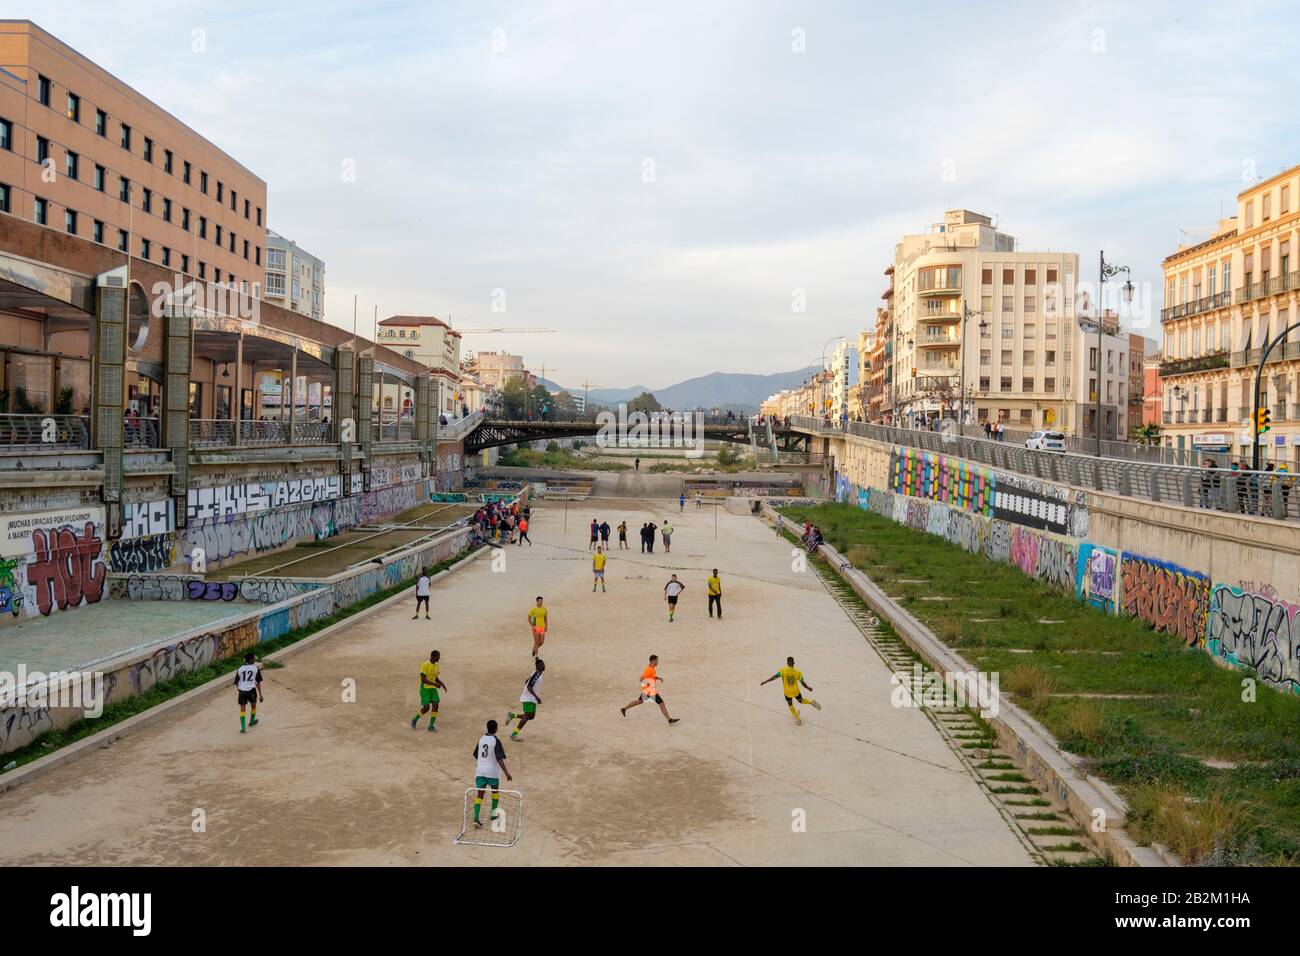 People paying football in the dried-up river Rio Guadaimedina. Stock Photo